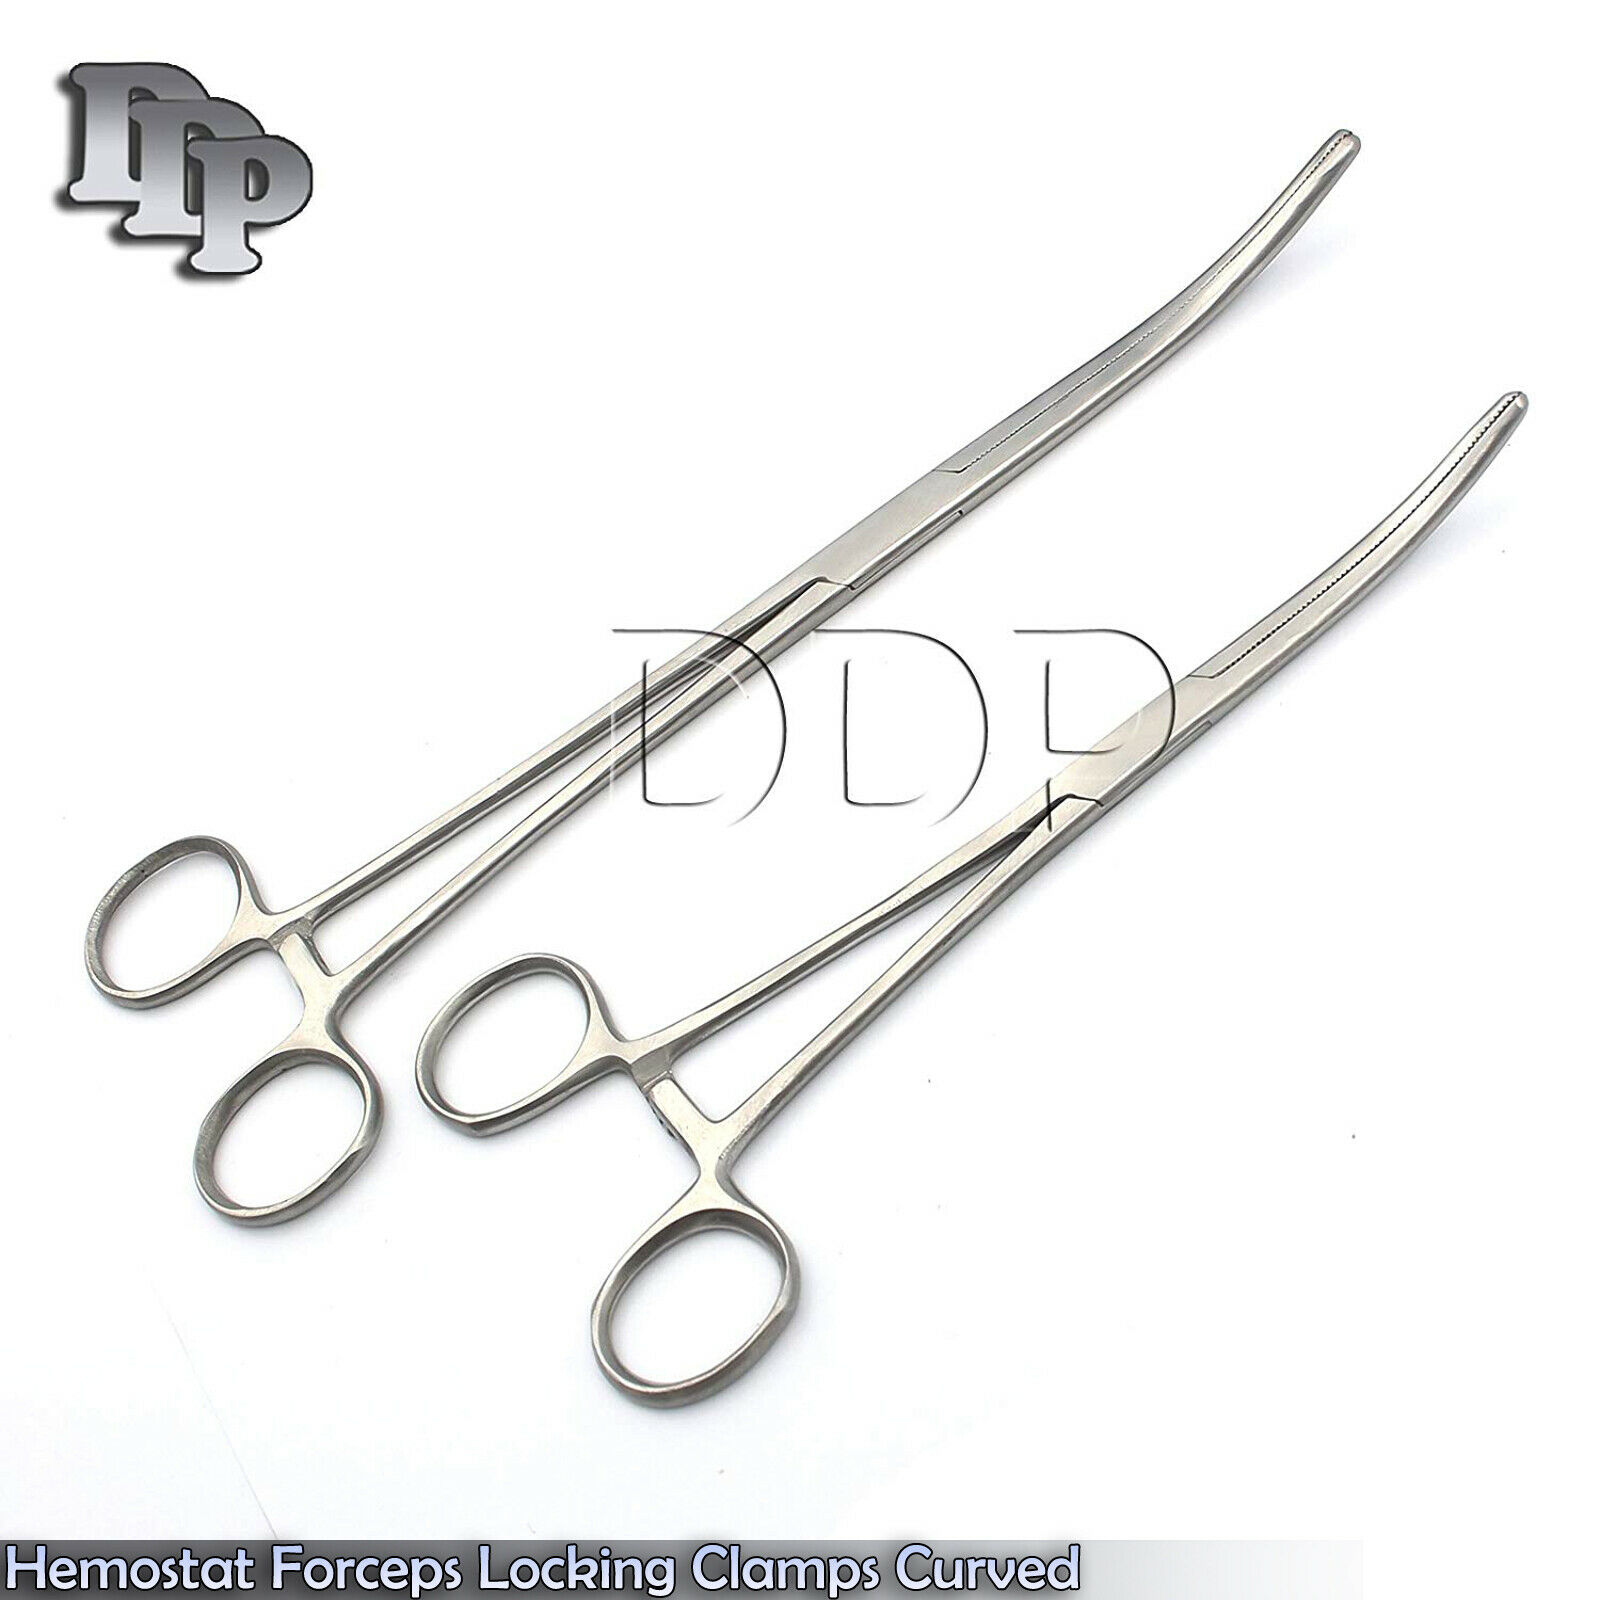 New 2pc Set 8" + 10" Curved Hemostat Forceps Locking Clamps Stainless Steel